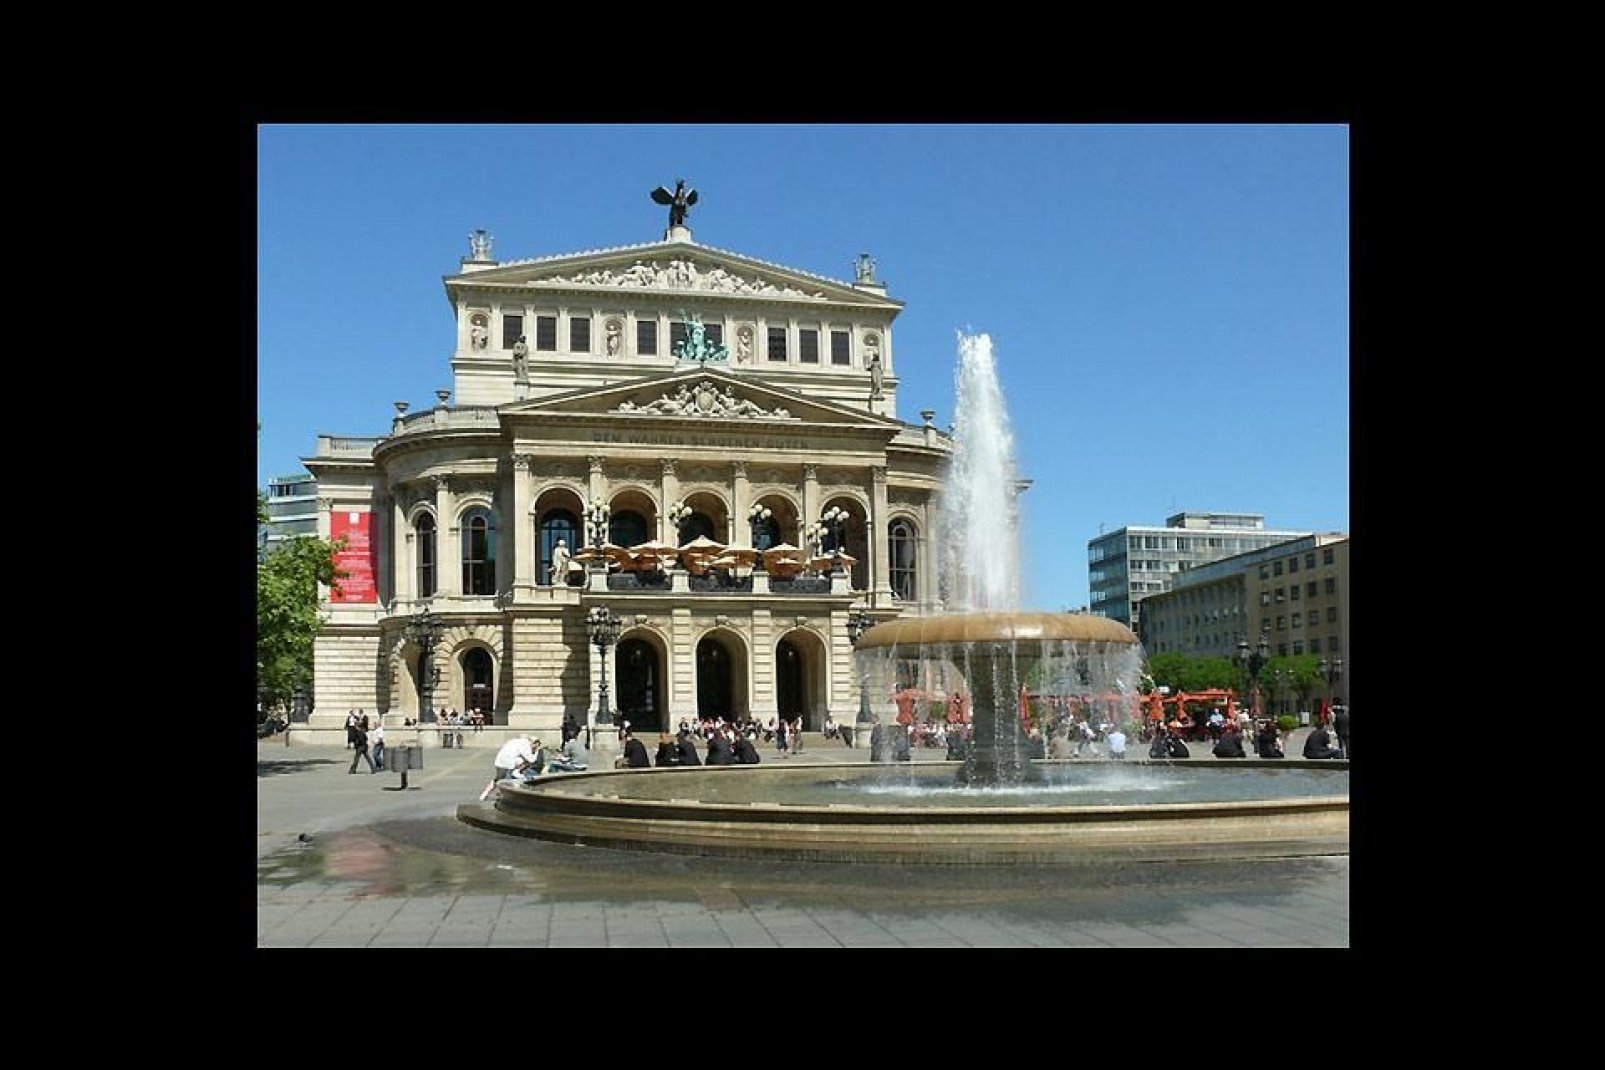 The Frankfurt Opera is one of the city's main attractions.